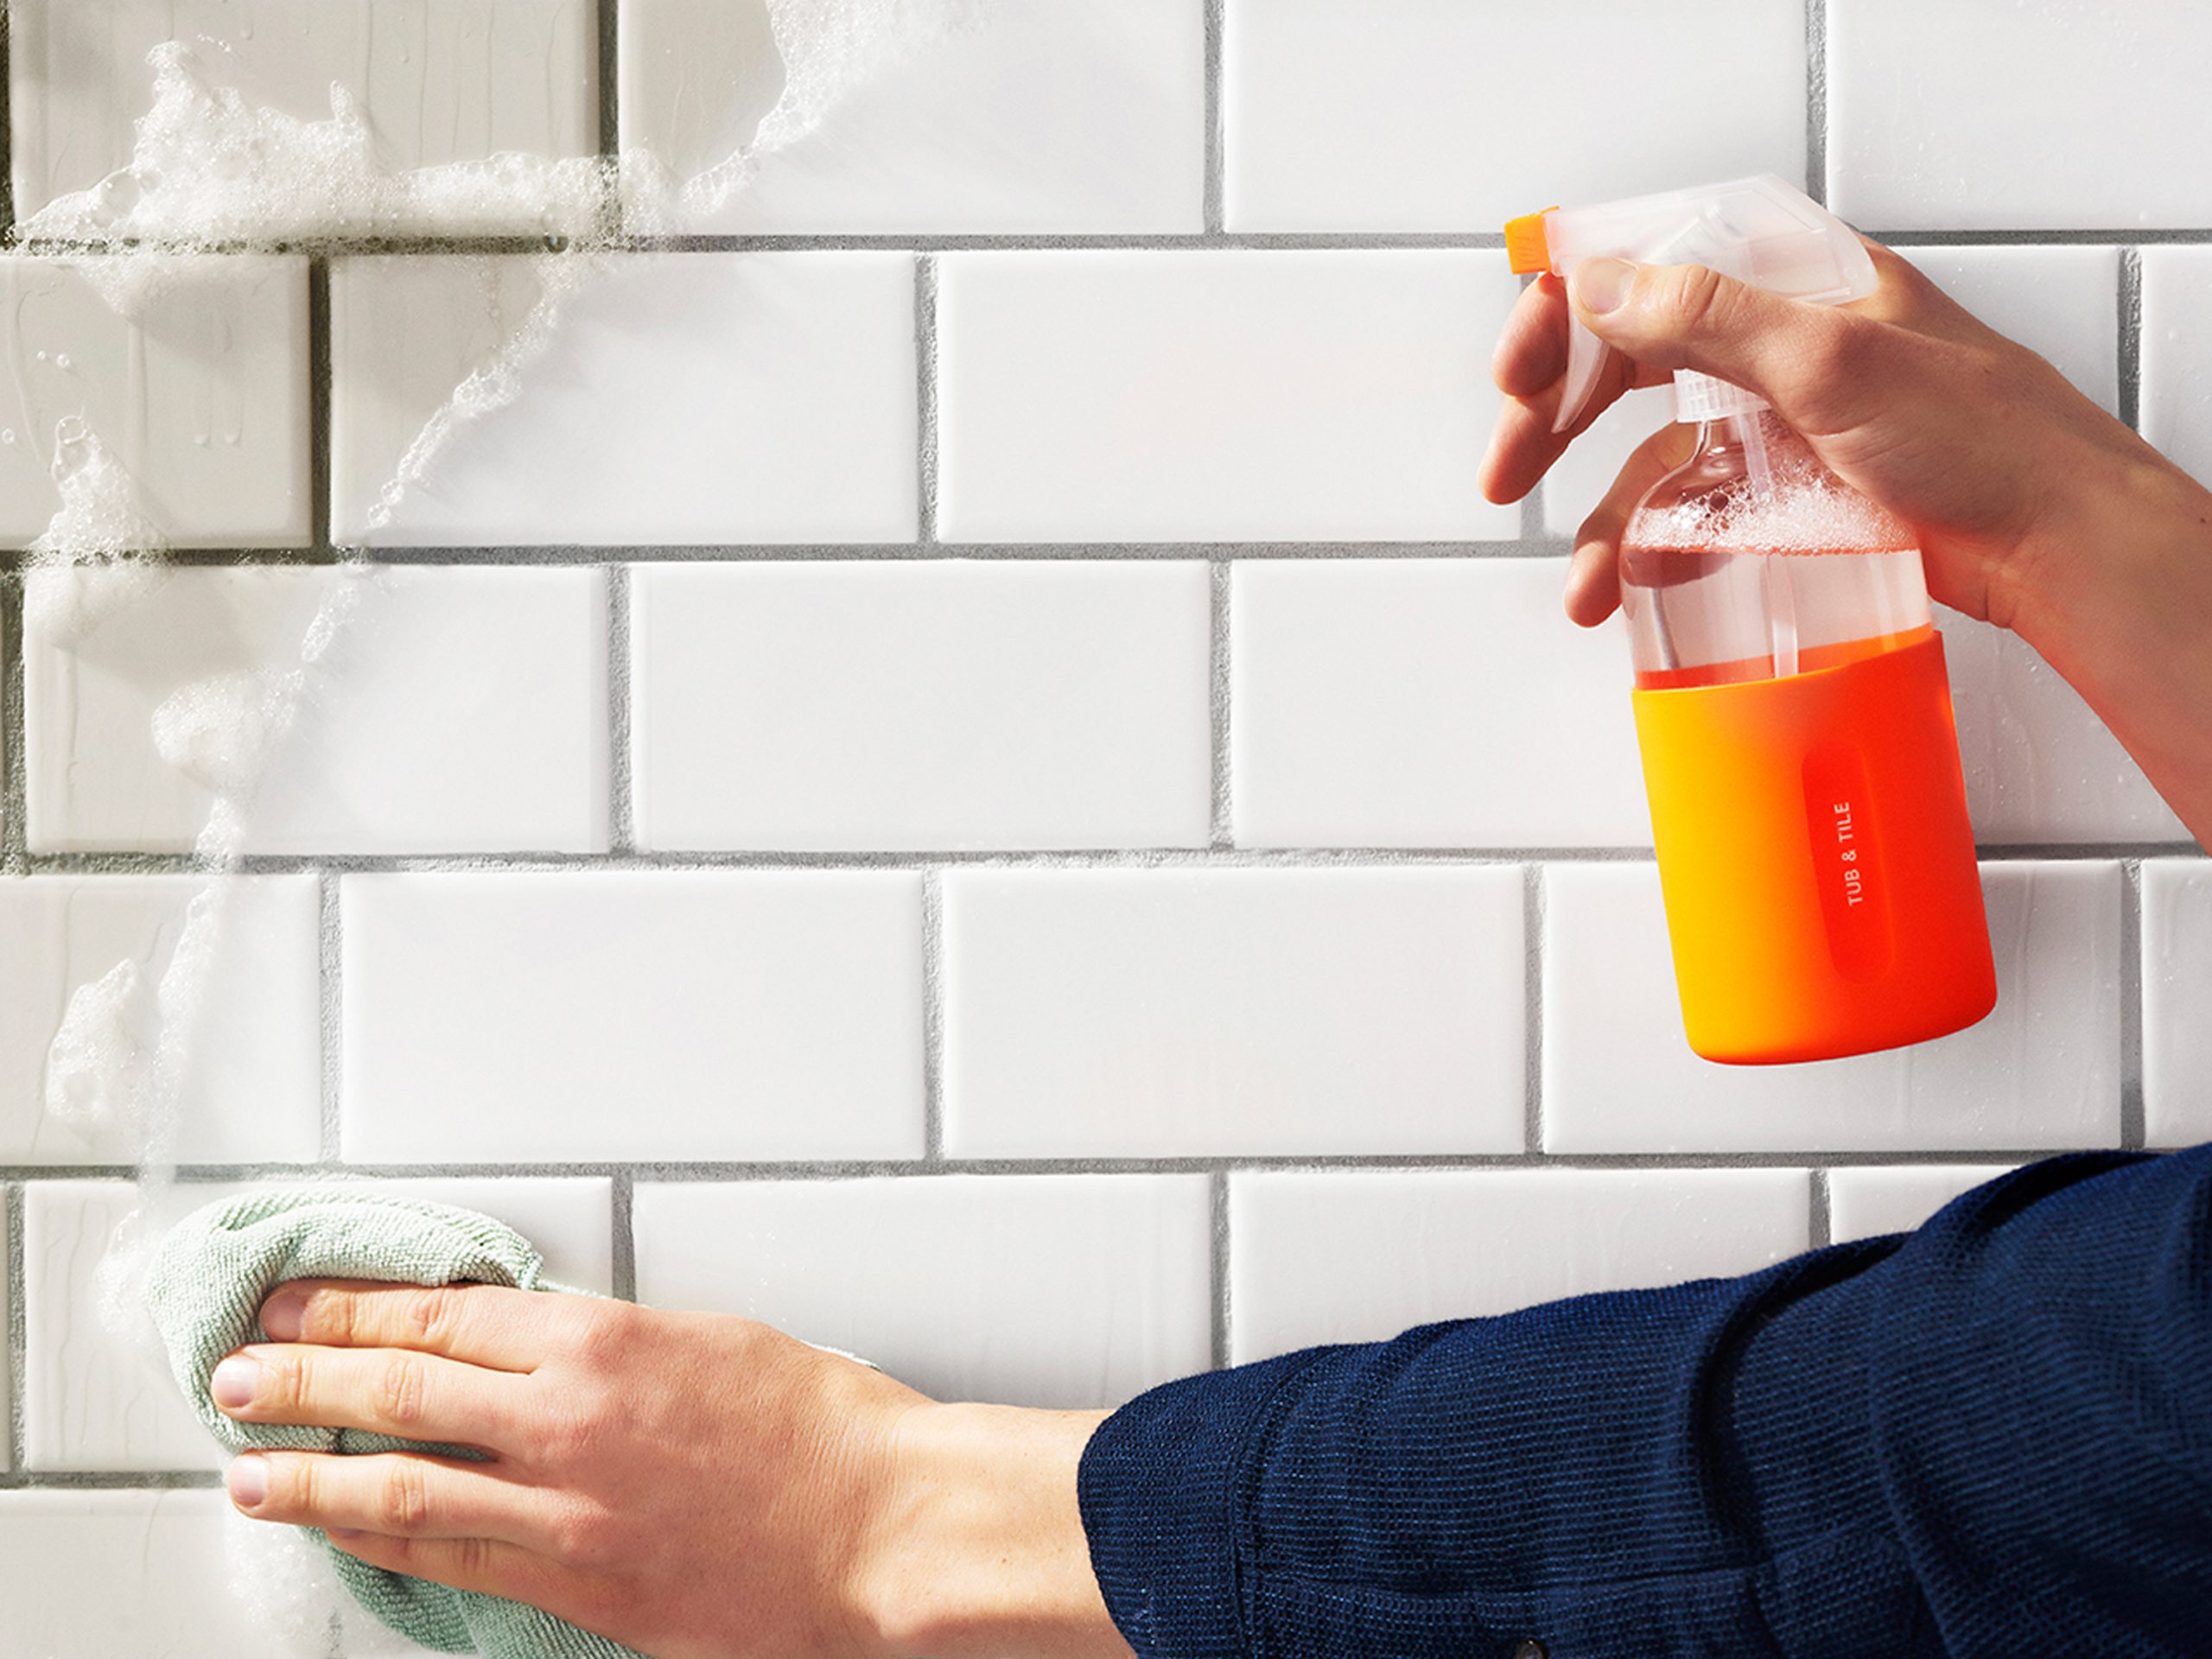 The Best Tile Cleaners You Can Buy and Make